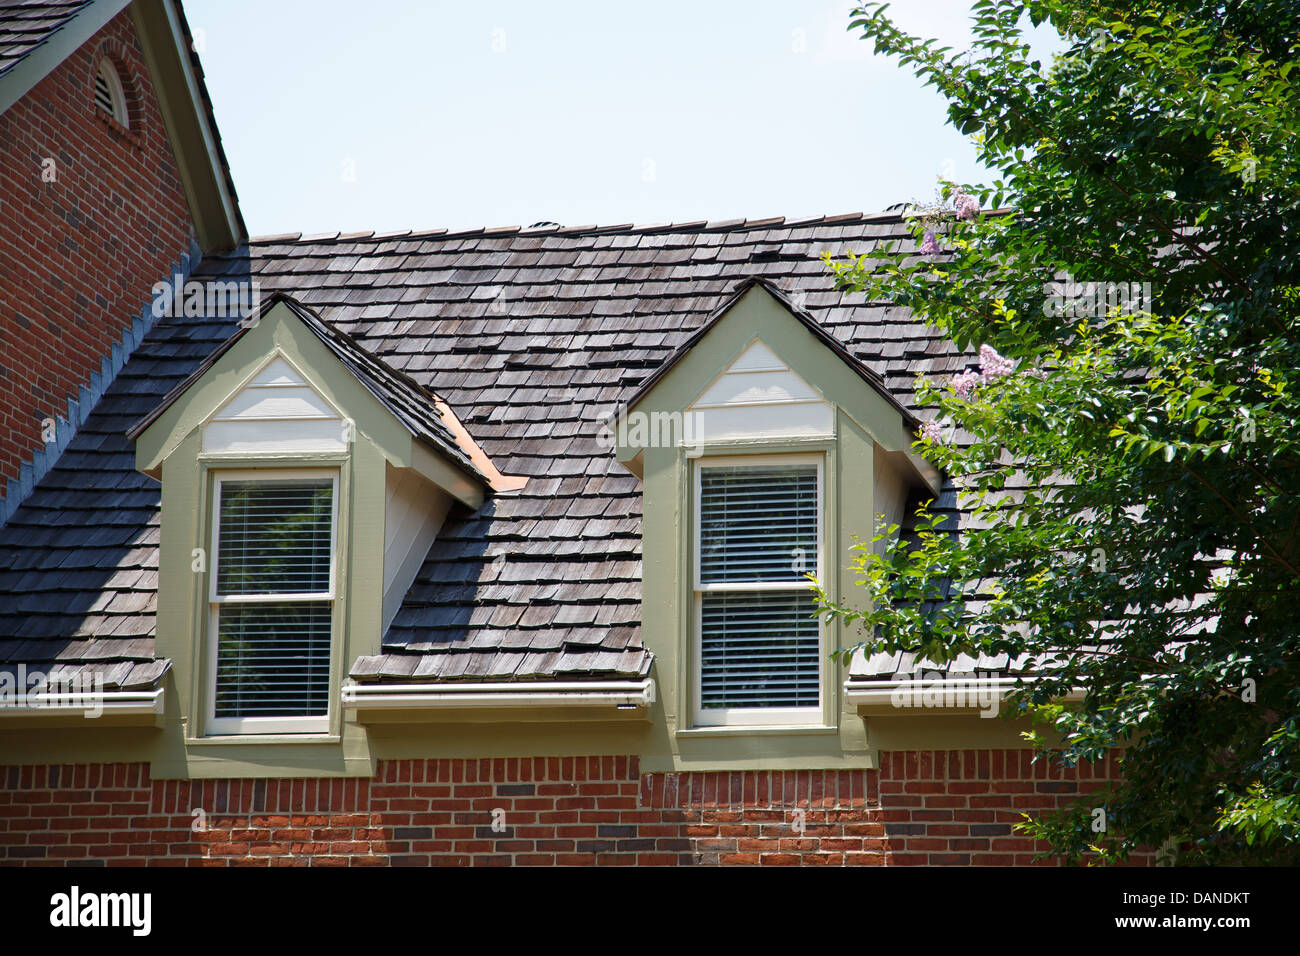 Two dormers in roof with wood shingles on a brick townhouse Stock Photo